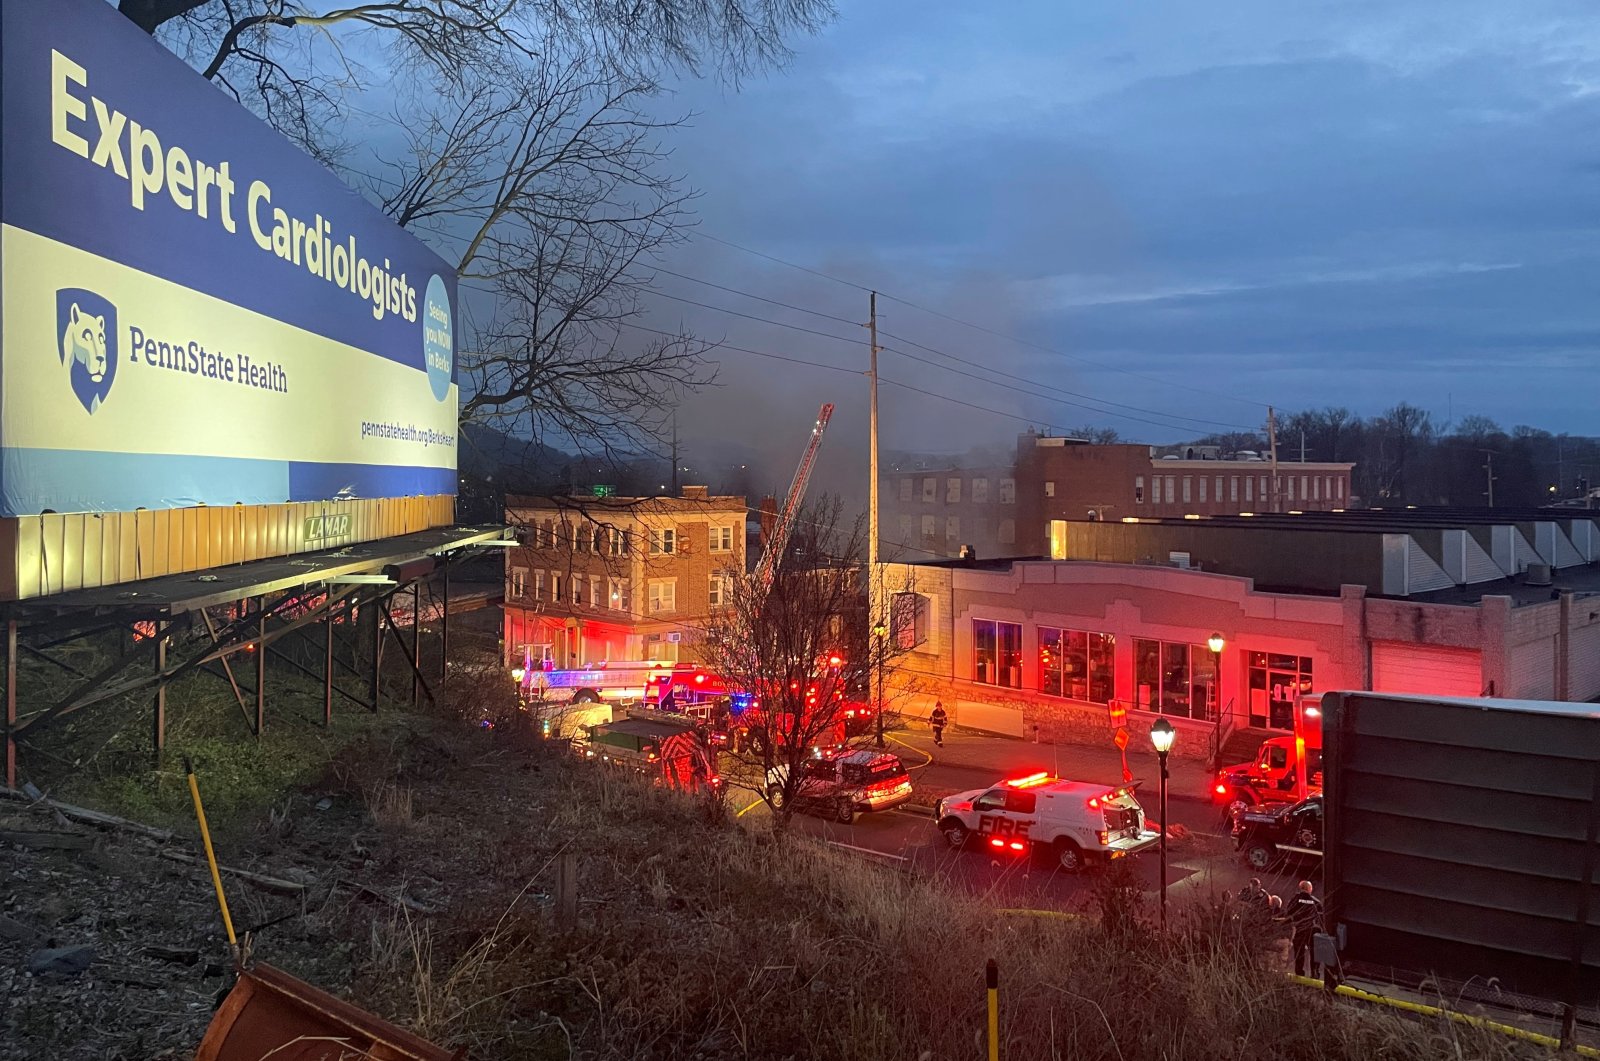 A general view shows smoke coming out from a chocolate factory after fire broke out, in West Reading, Pennsylvania, U.S., March 24, 2023, in this picture obtained from social media. (Twitter @Based_In410/via Reuters)